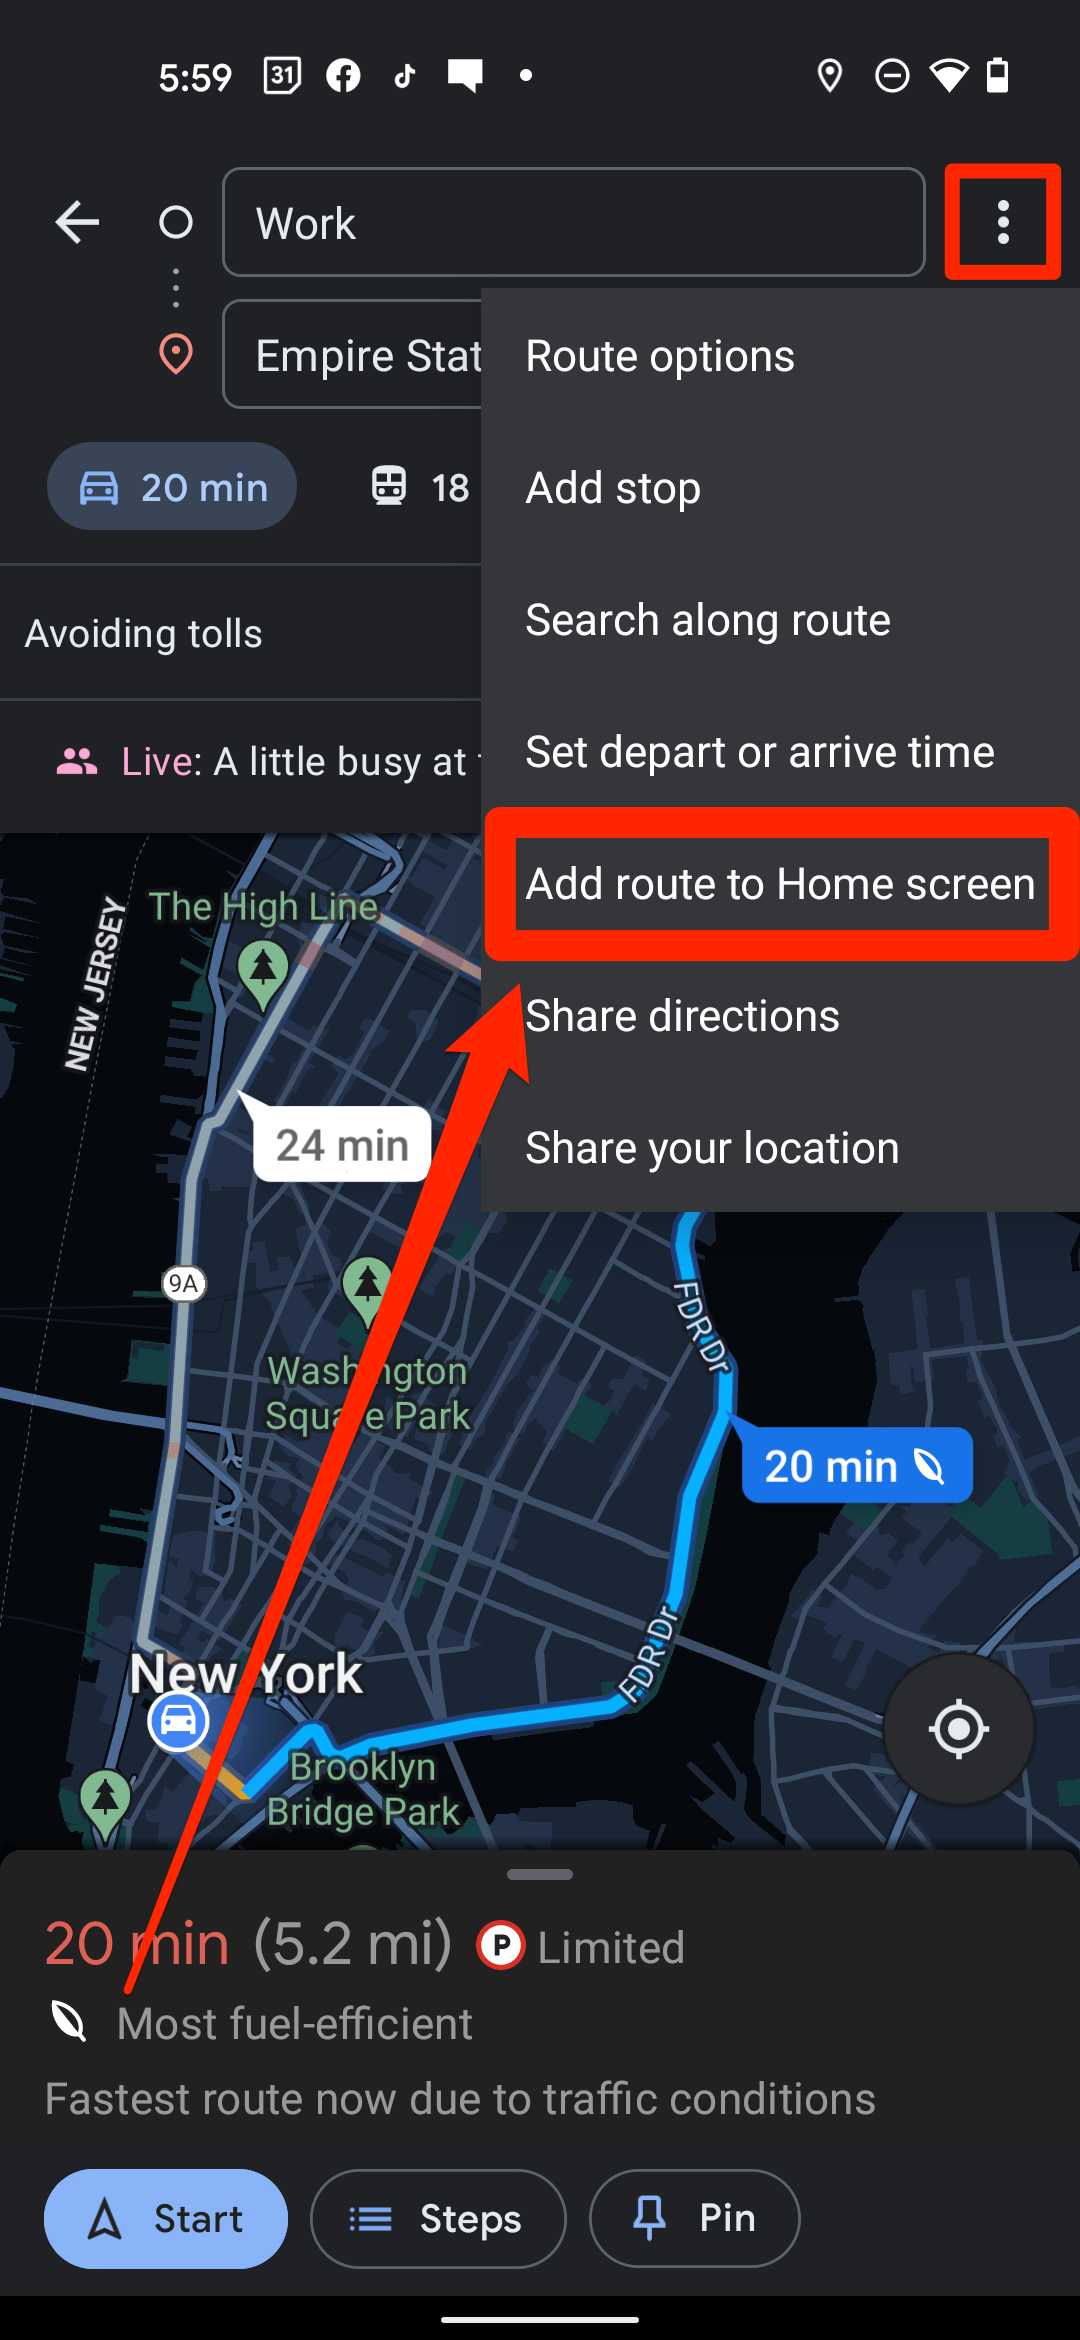 The "Add route to Home screen" option in the Google Maps Android app.